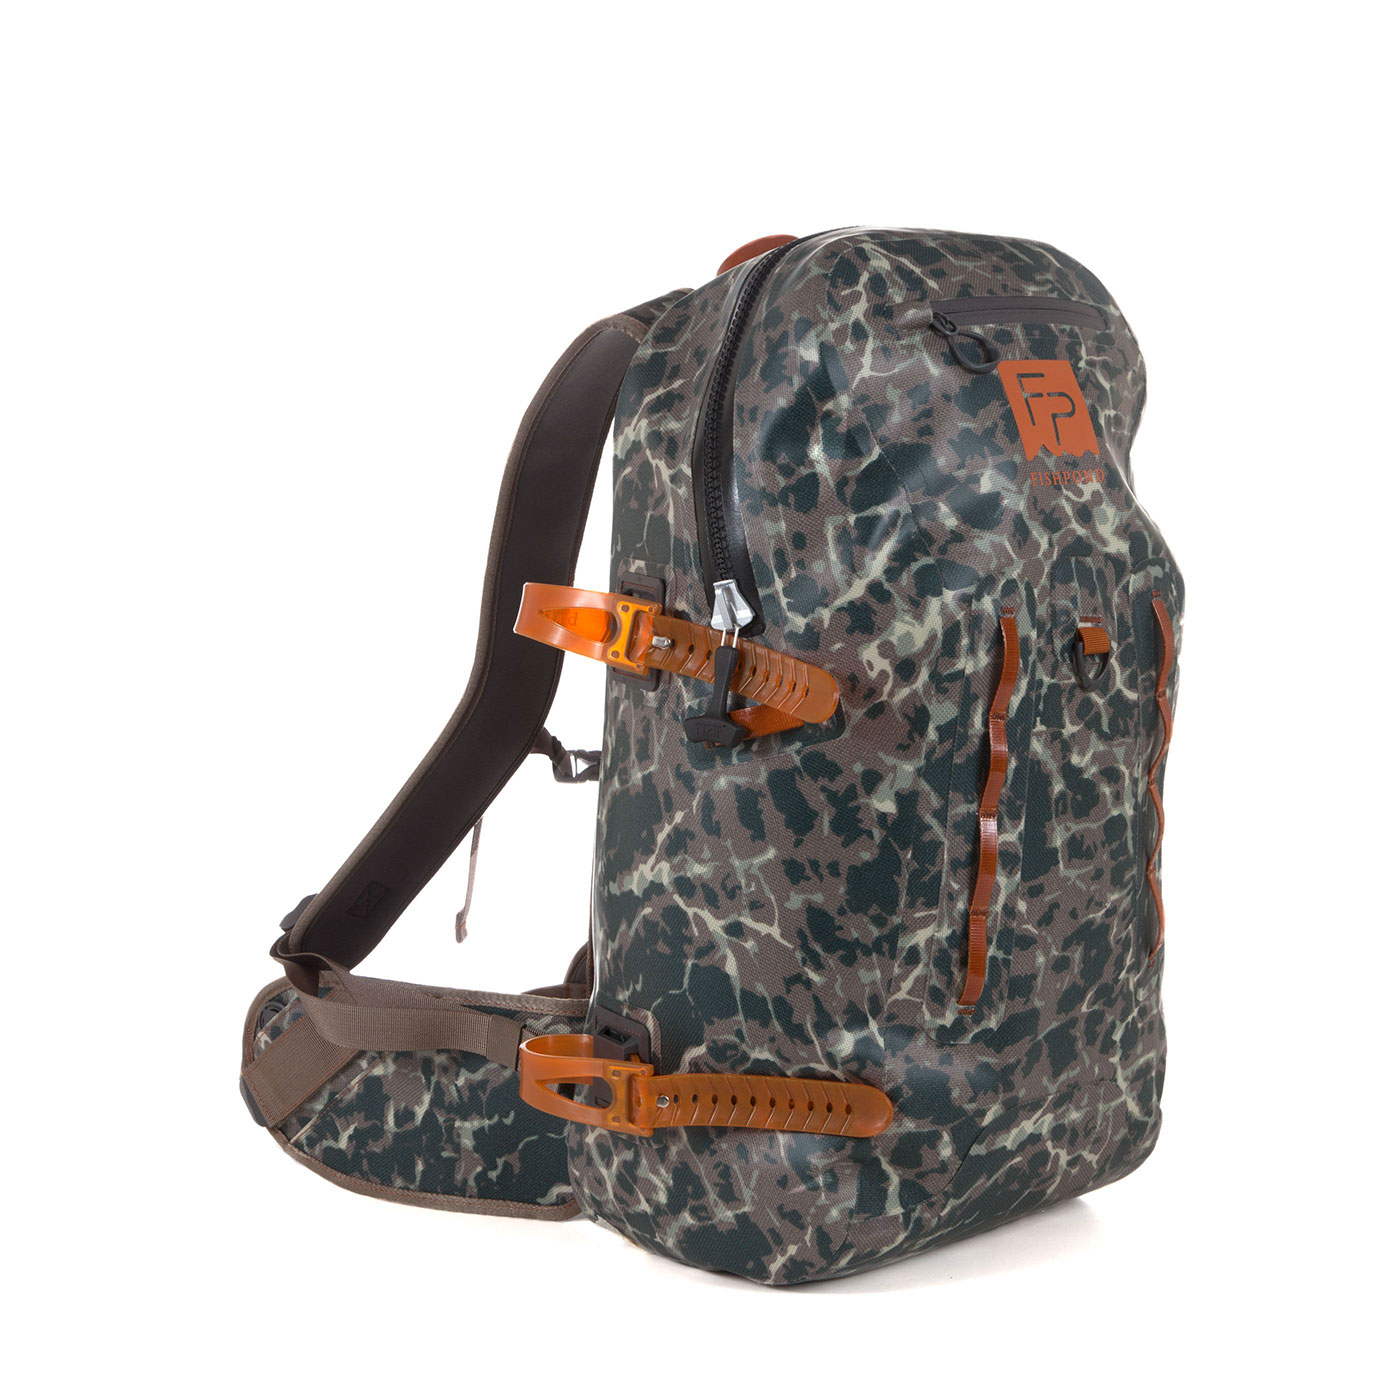 FishPond Thunderhead Submersible Backpack - Riverbed Camo - Click Image to Close